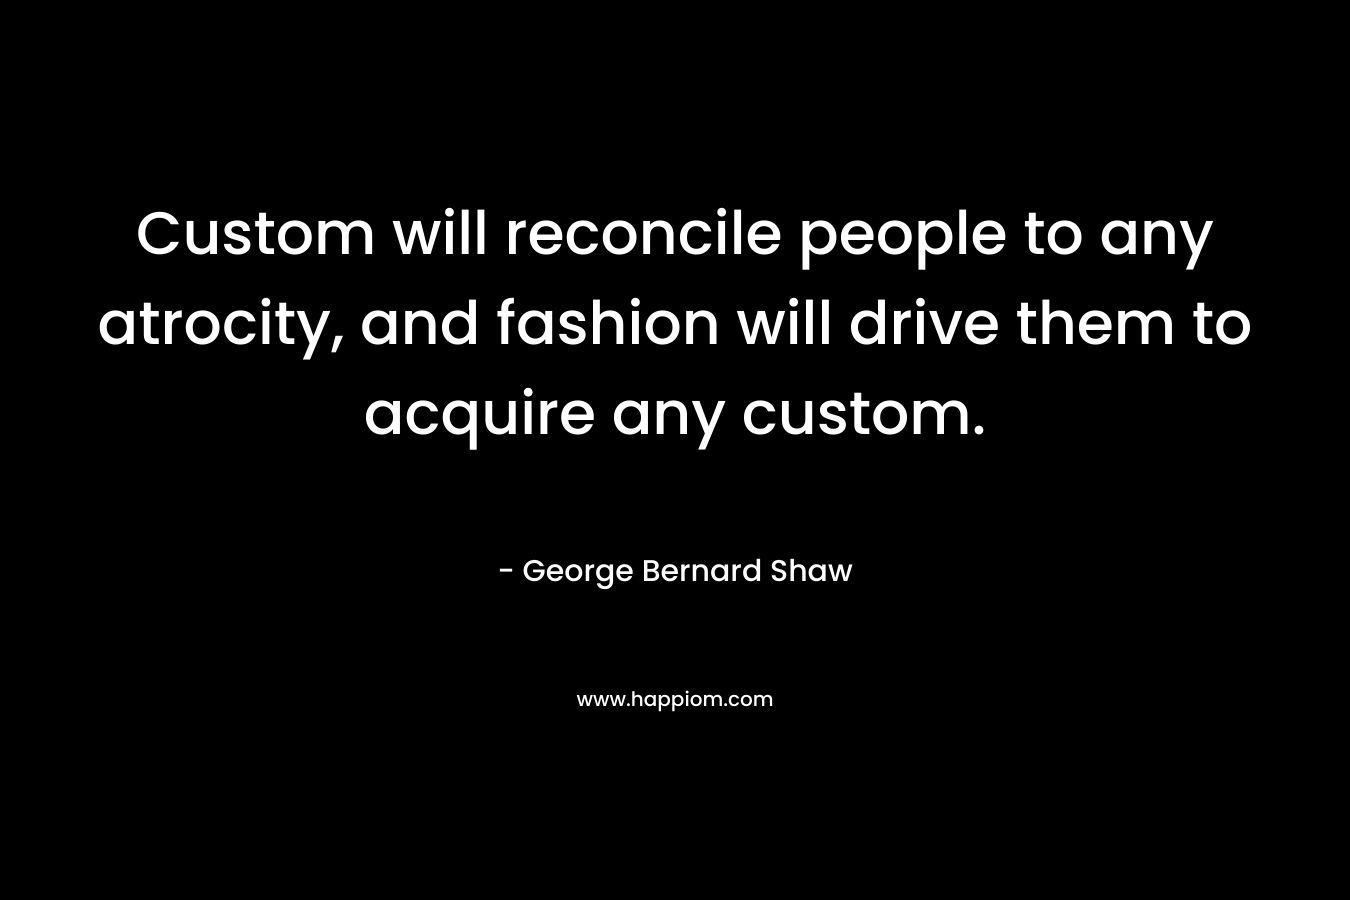 Custom will reconcile people to any atrocity, and fashion will drive them to acquire any custom.